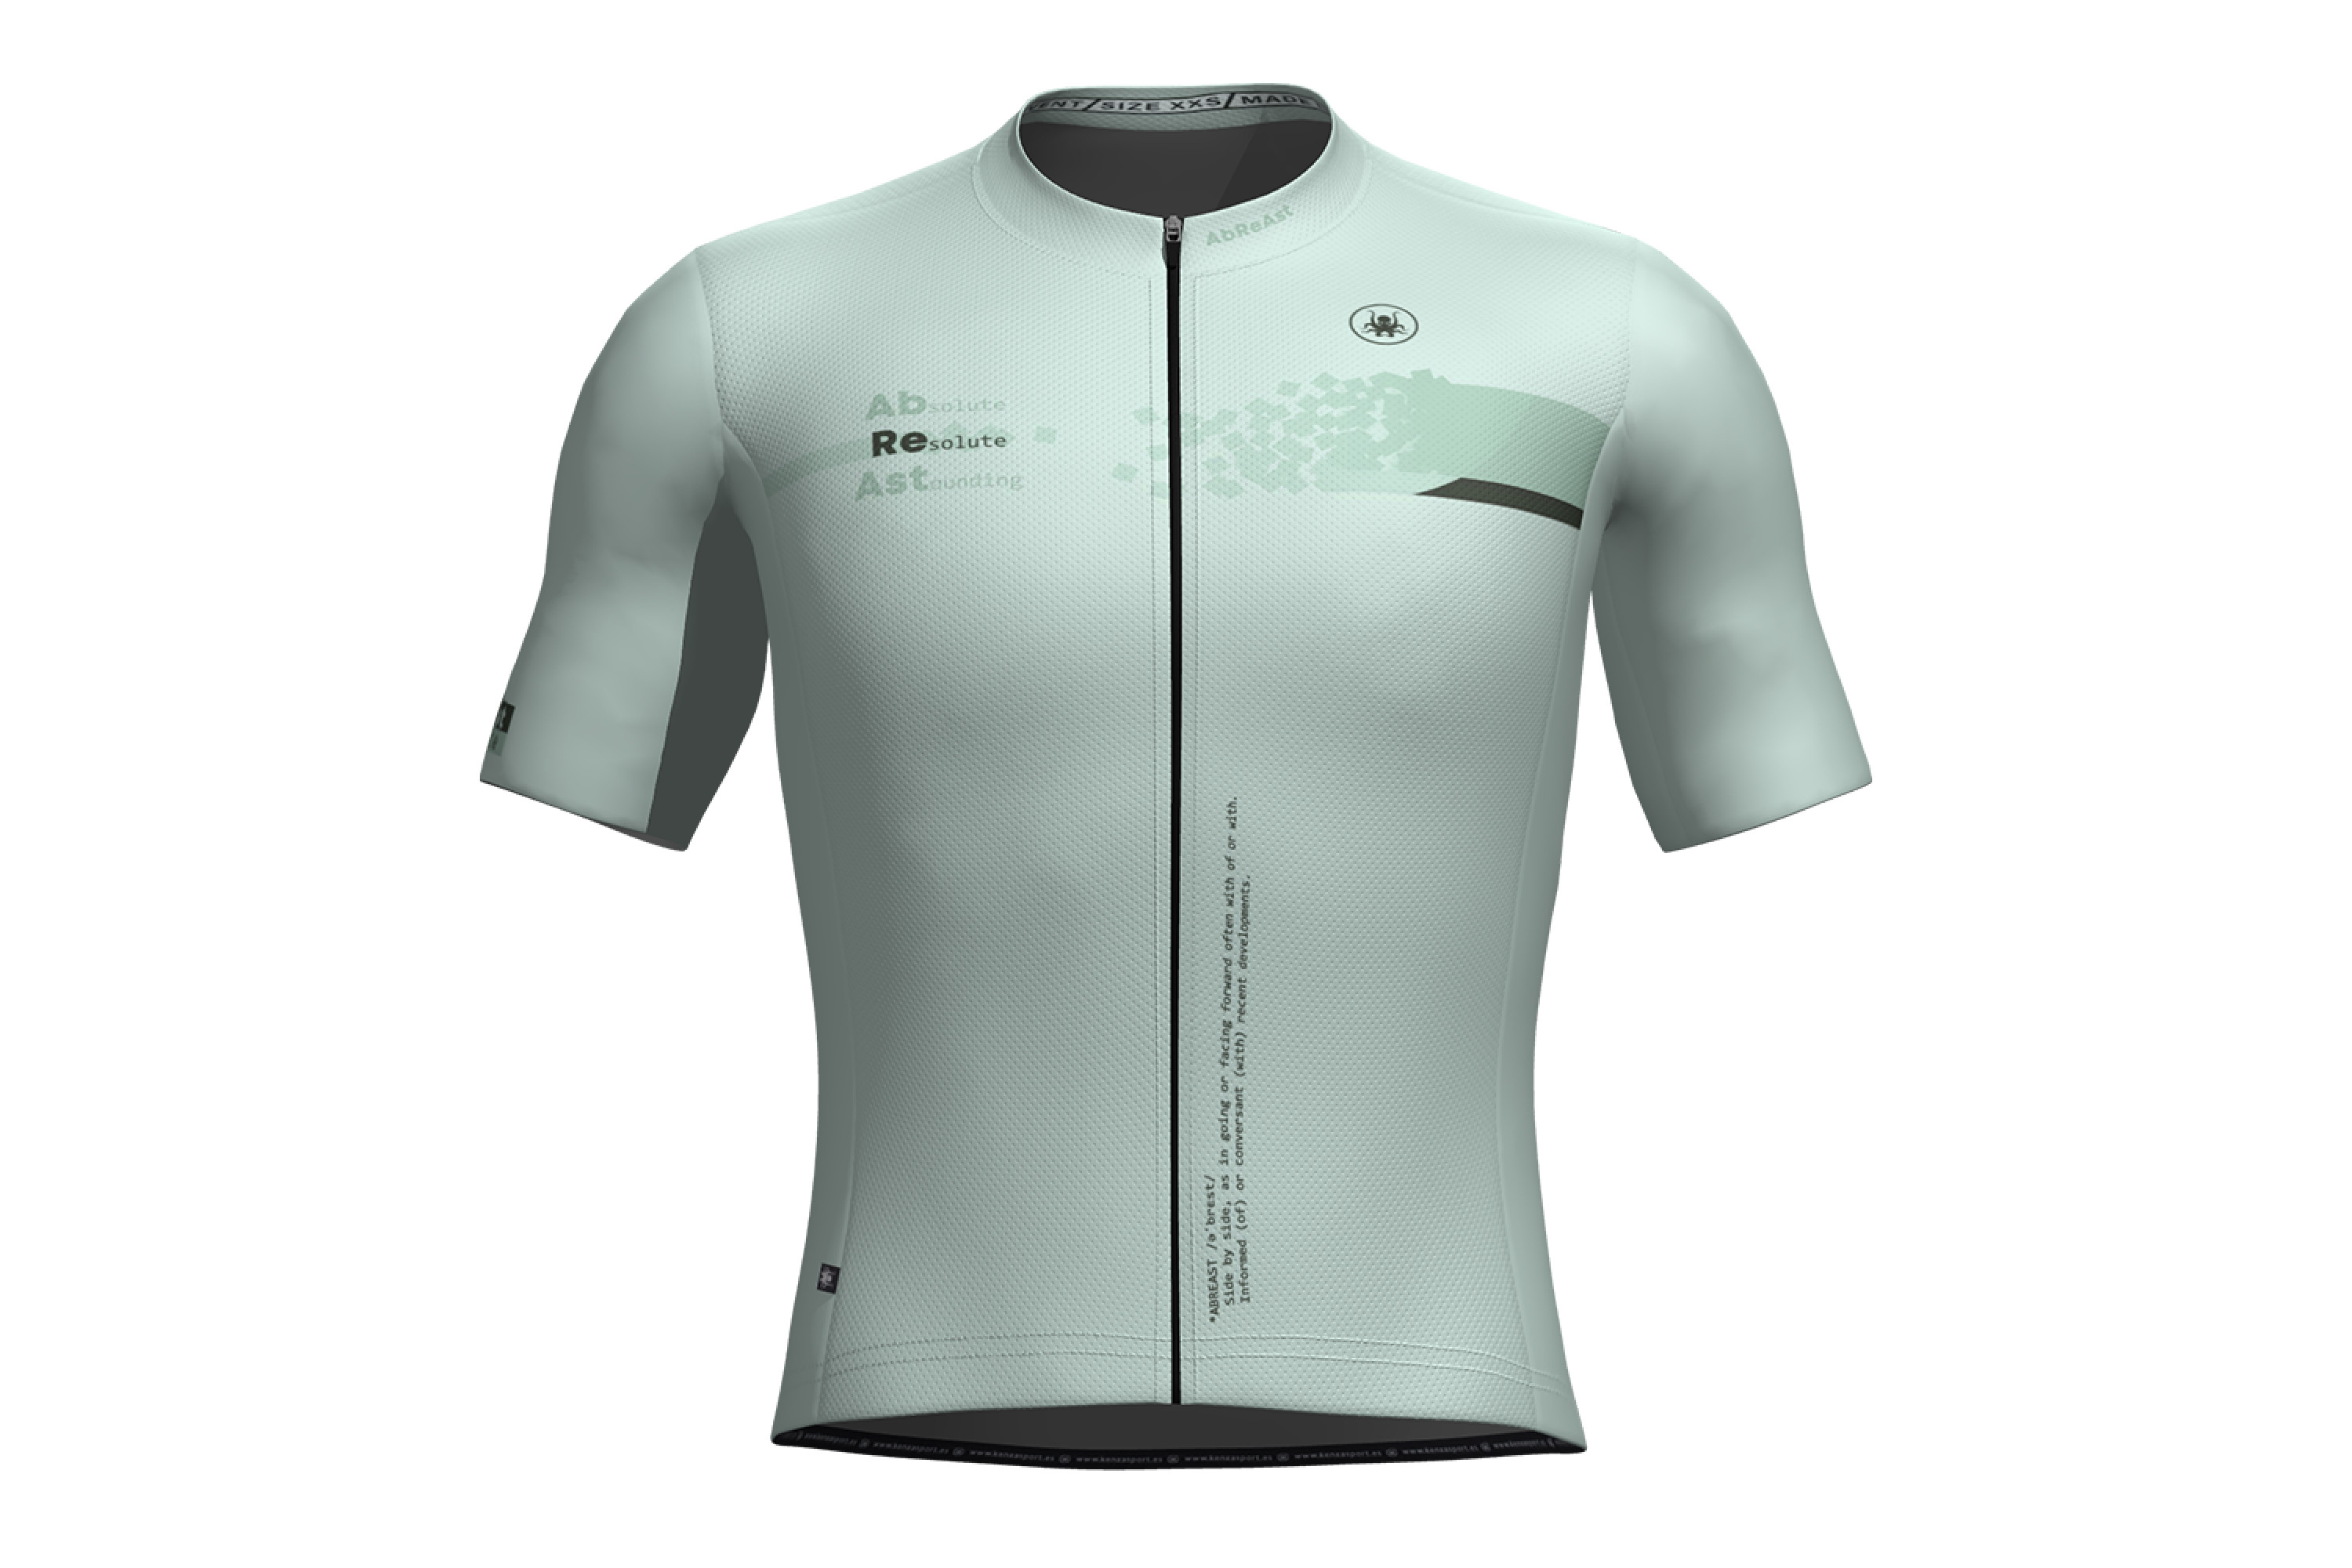 MAILLOT AbReAst RESOLUTE MINT